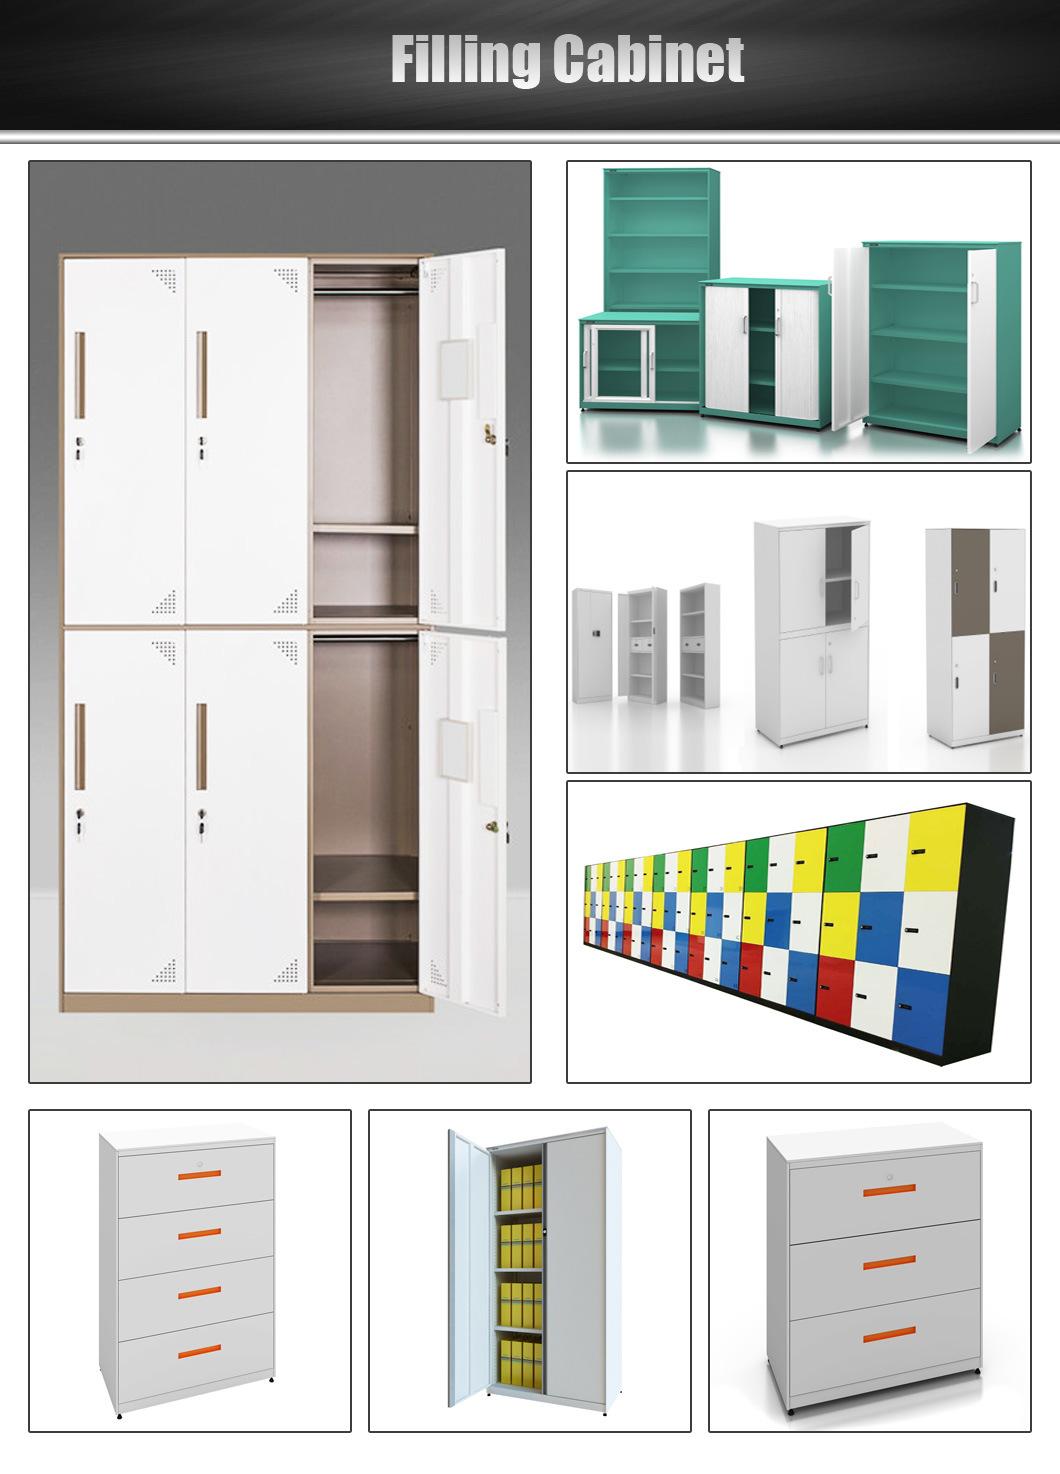 Sophisticated Technologies Work Storage Cabinets with Environmentally-Friendly Materials